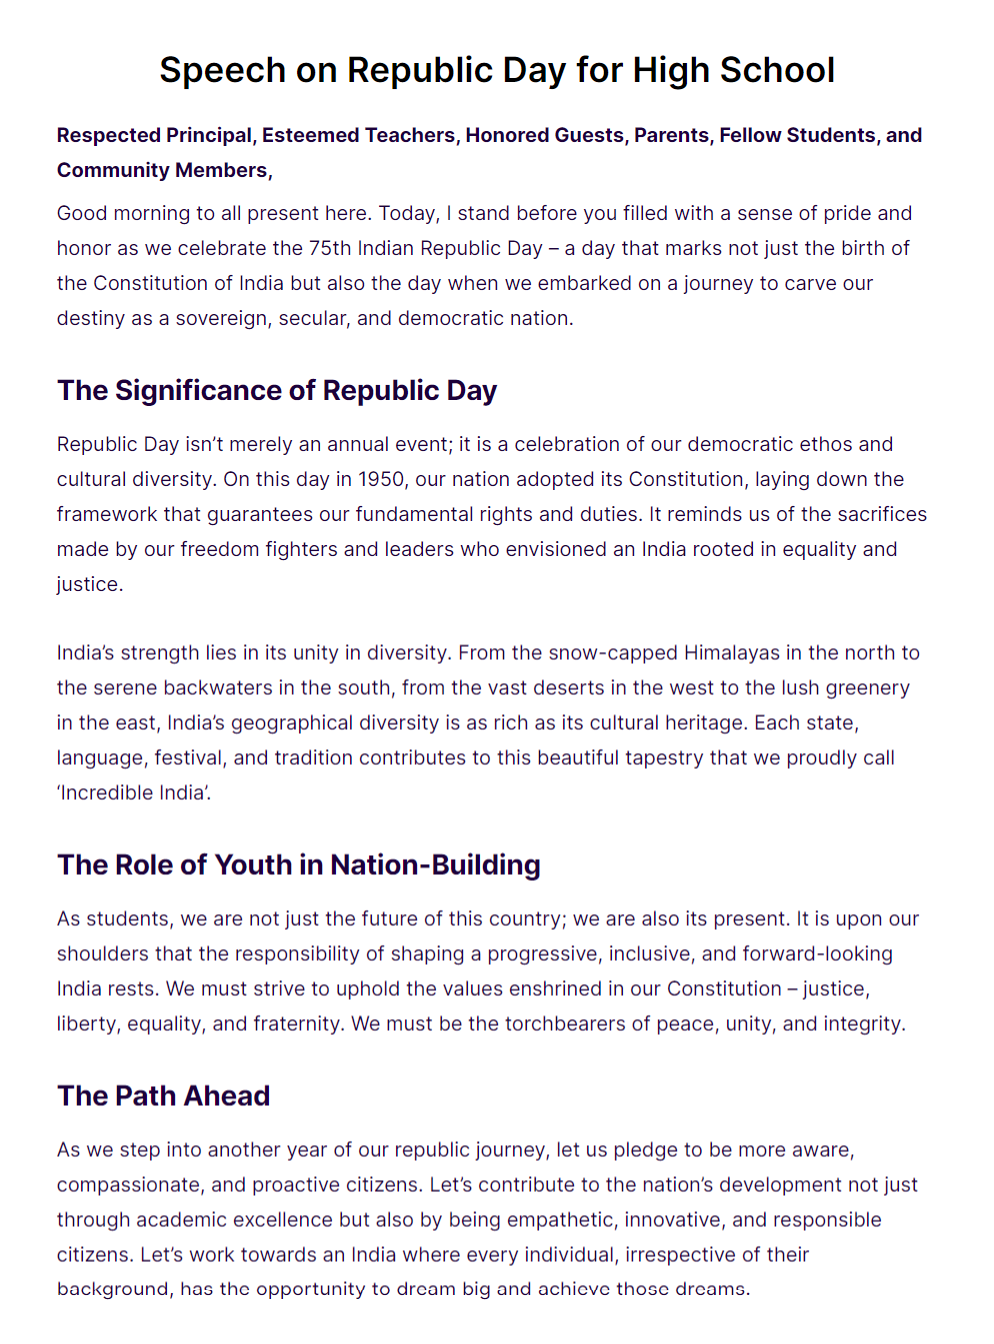 republic day speech for high school examples edit download 1 1